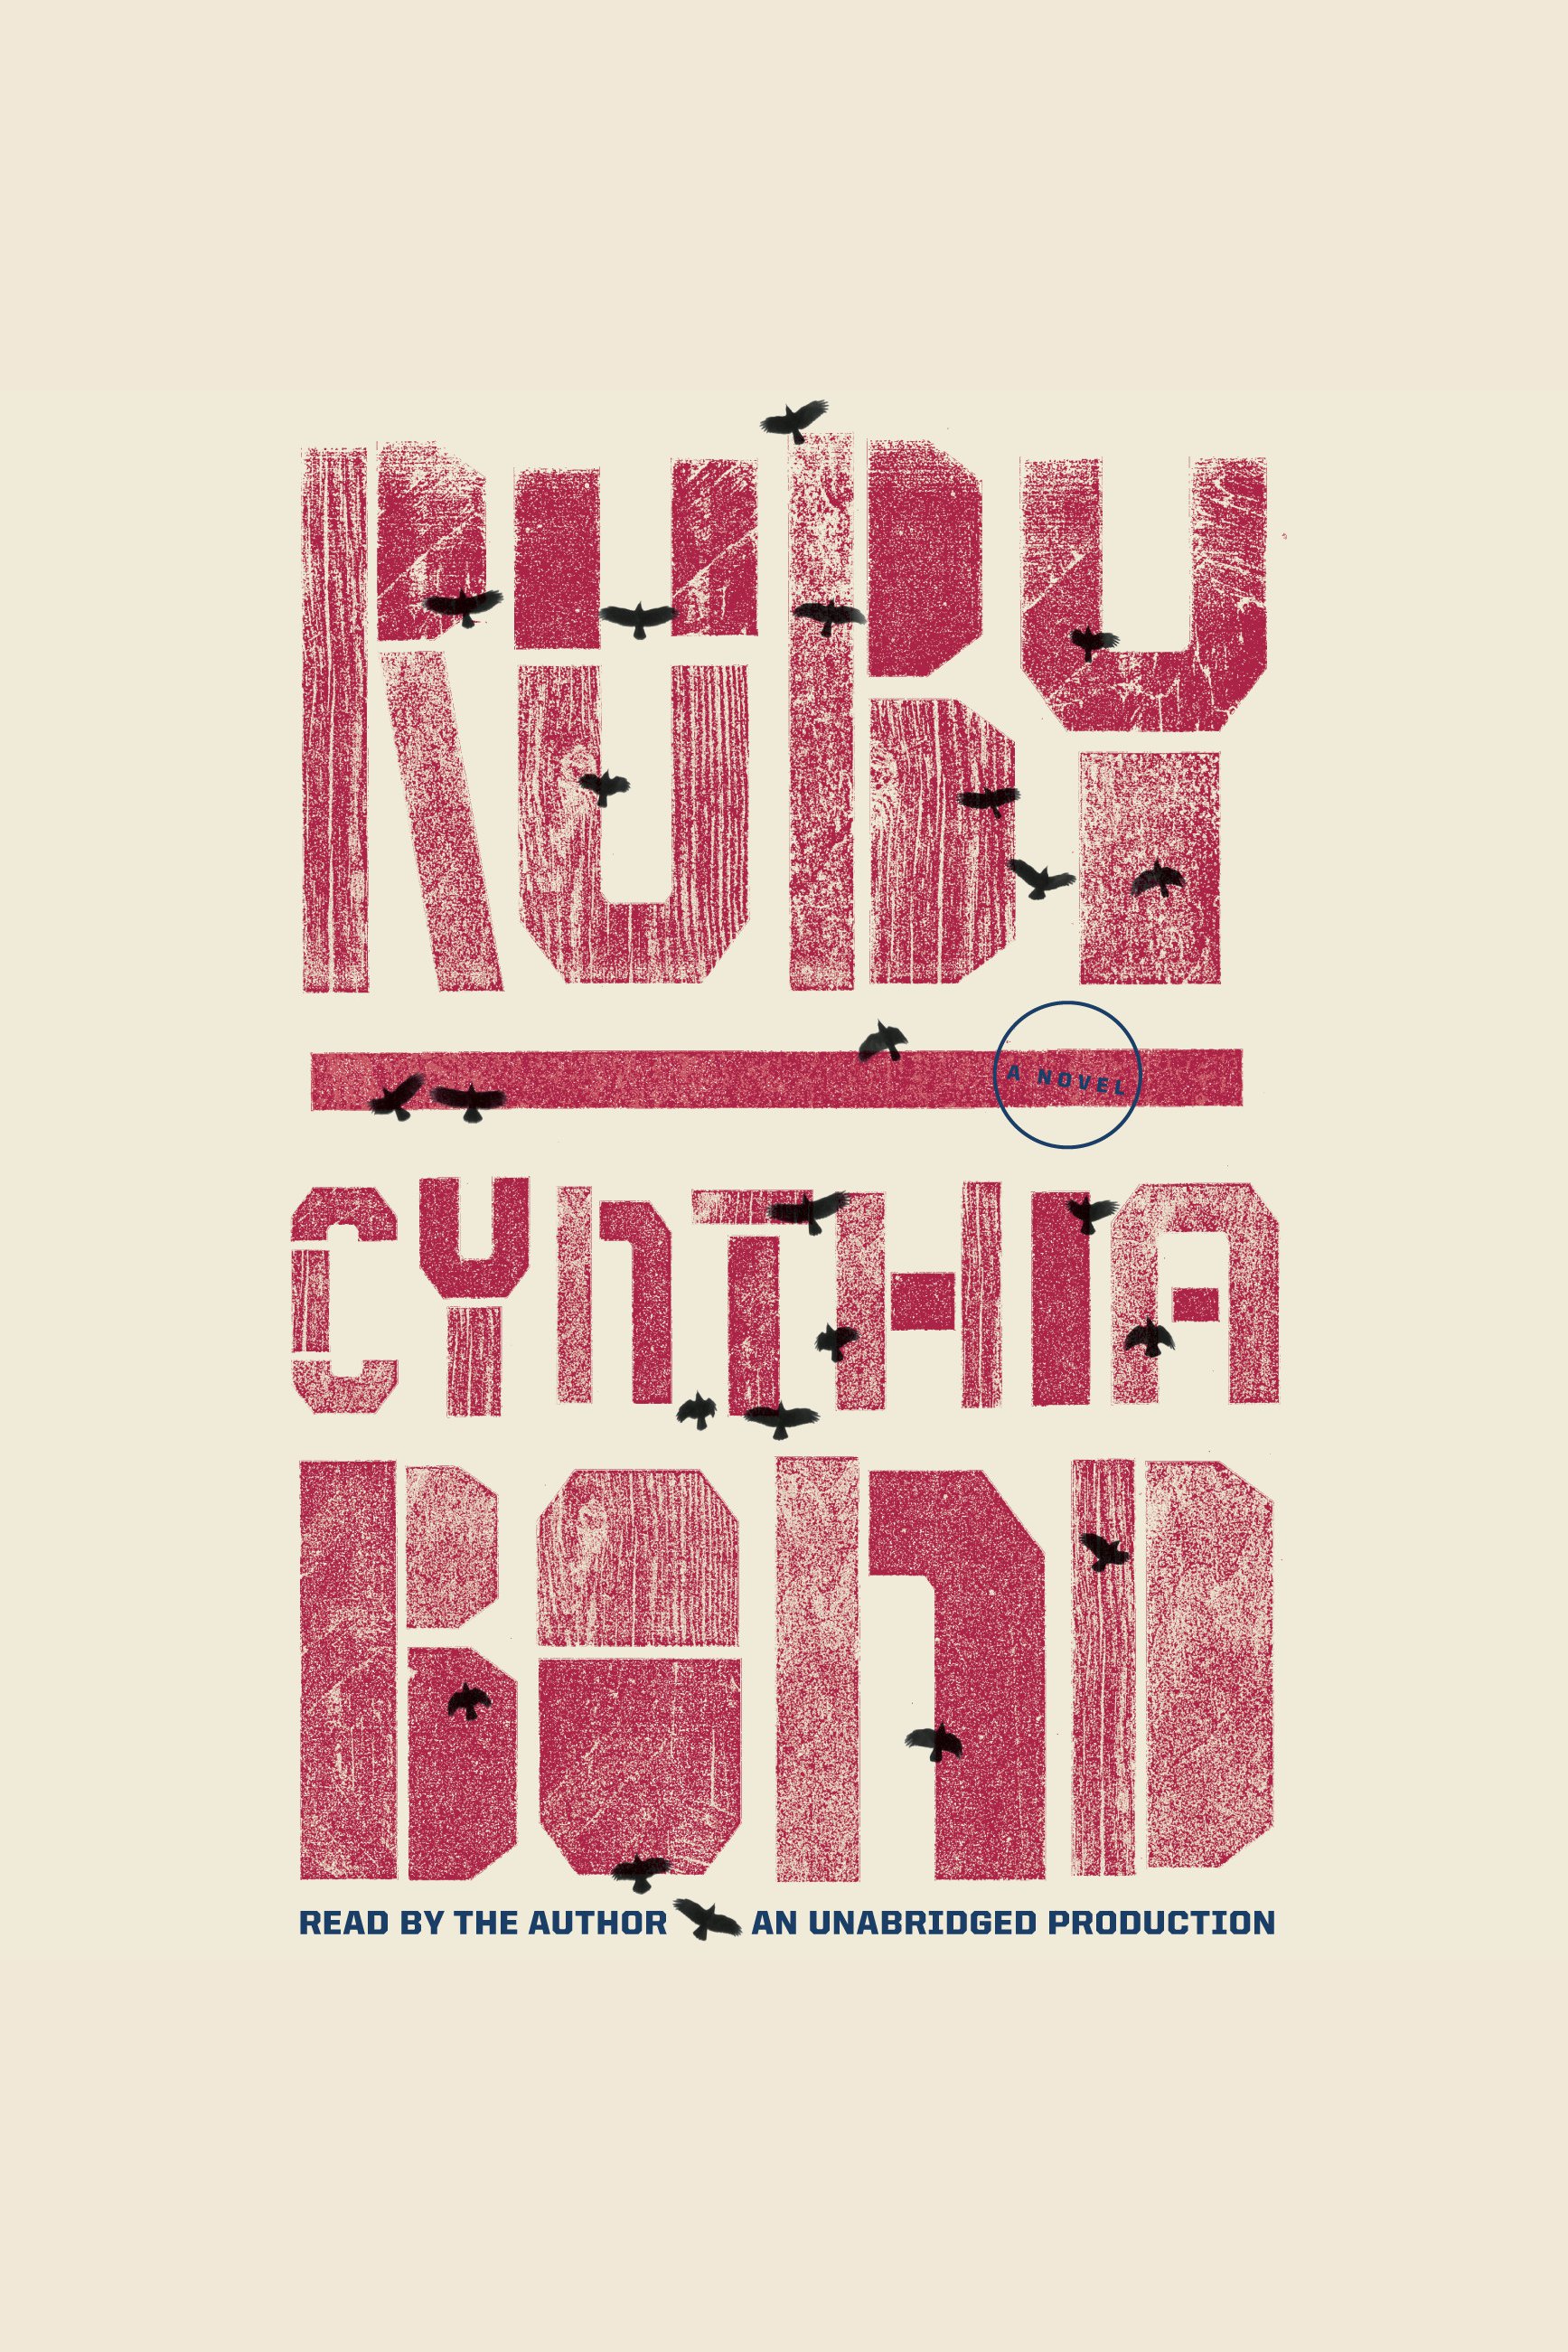 Ruby cover image